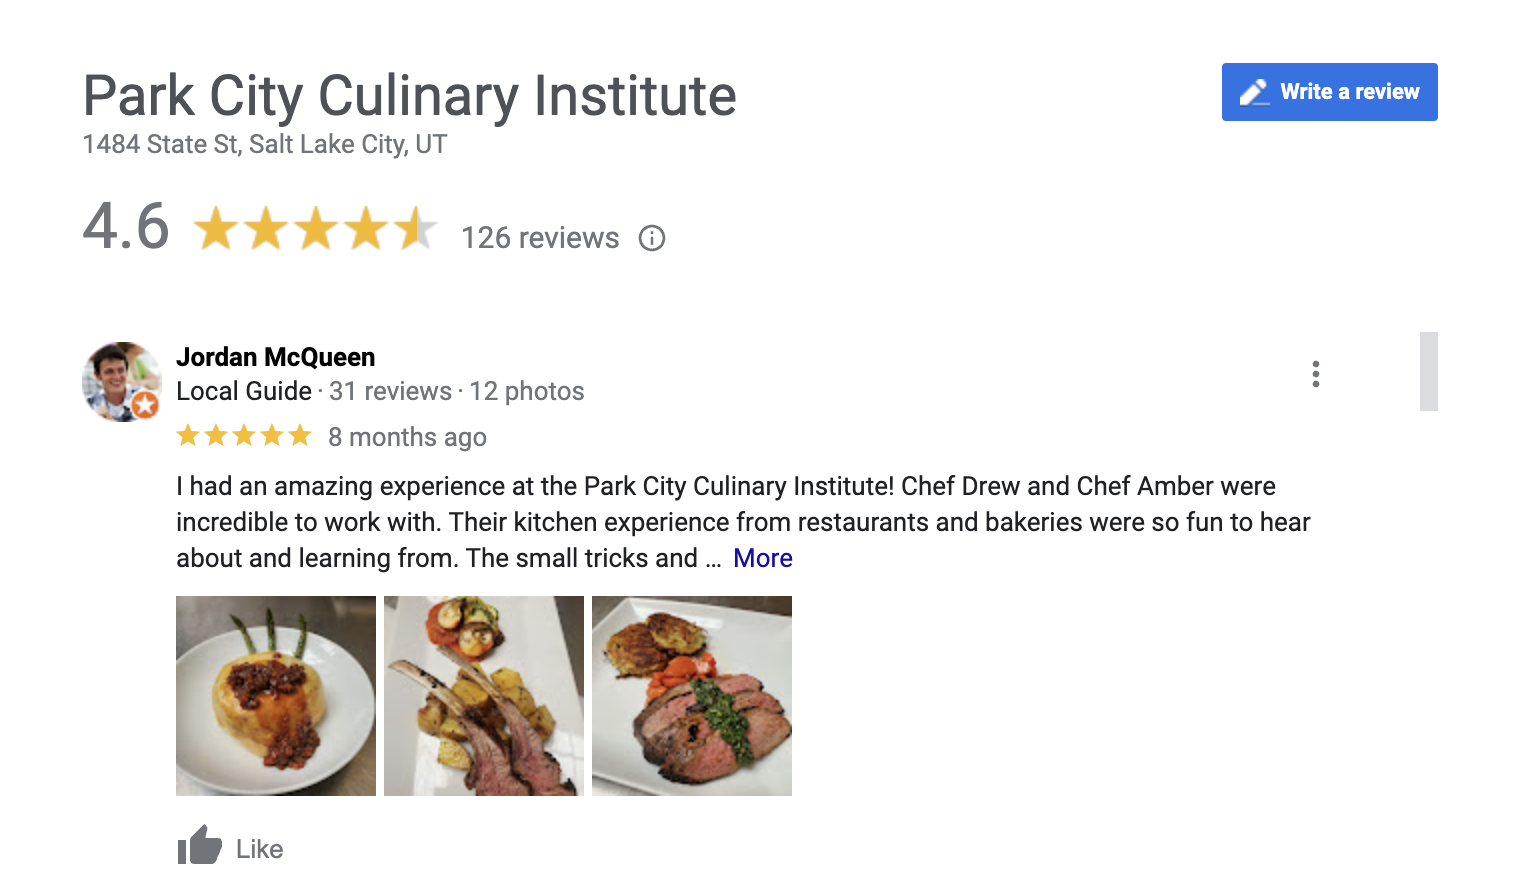 Google reviews provide social proof for your venue or events